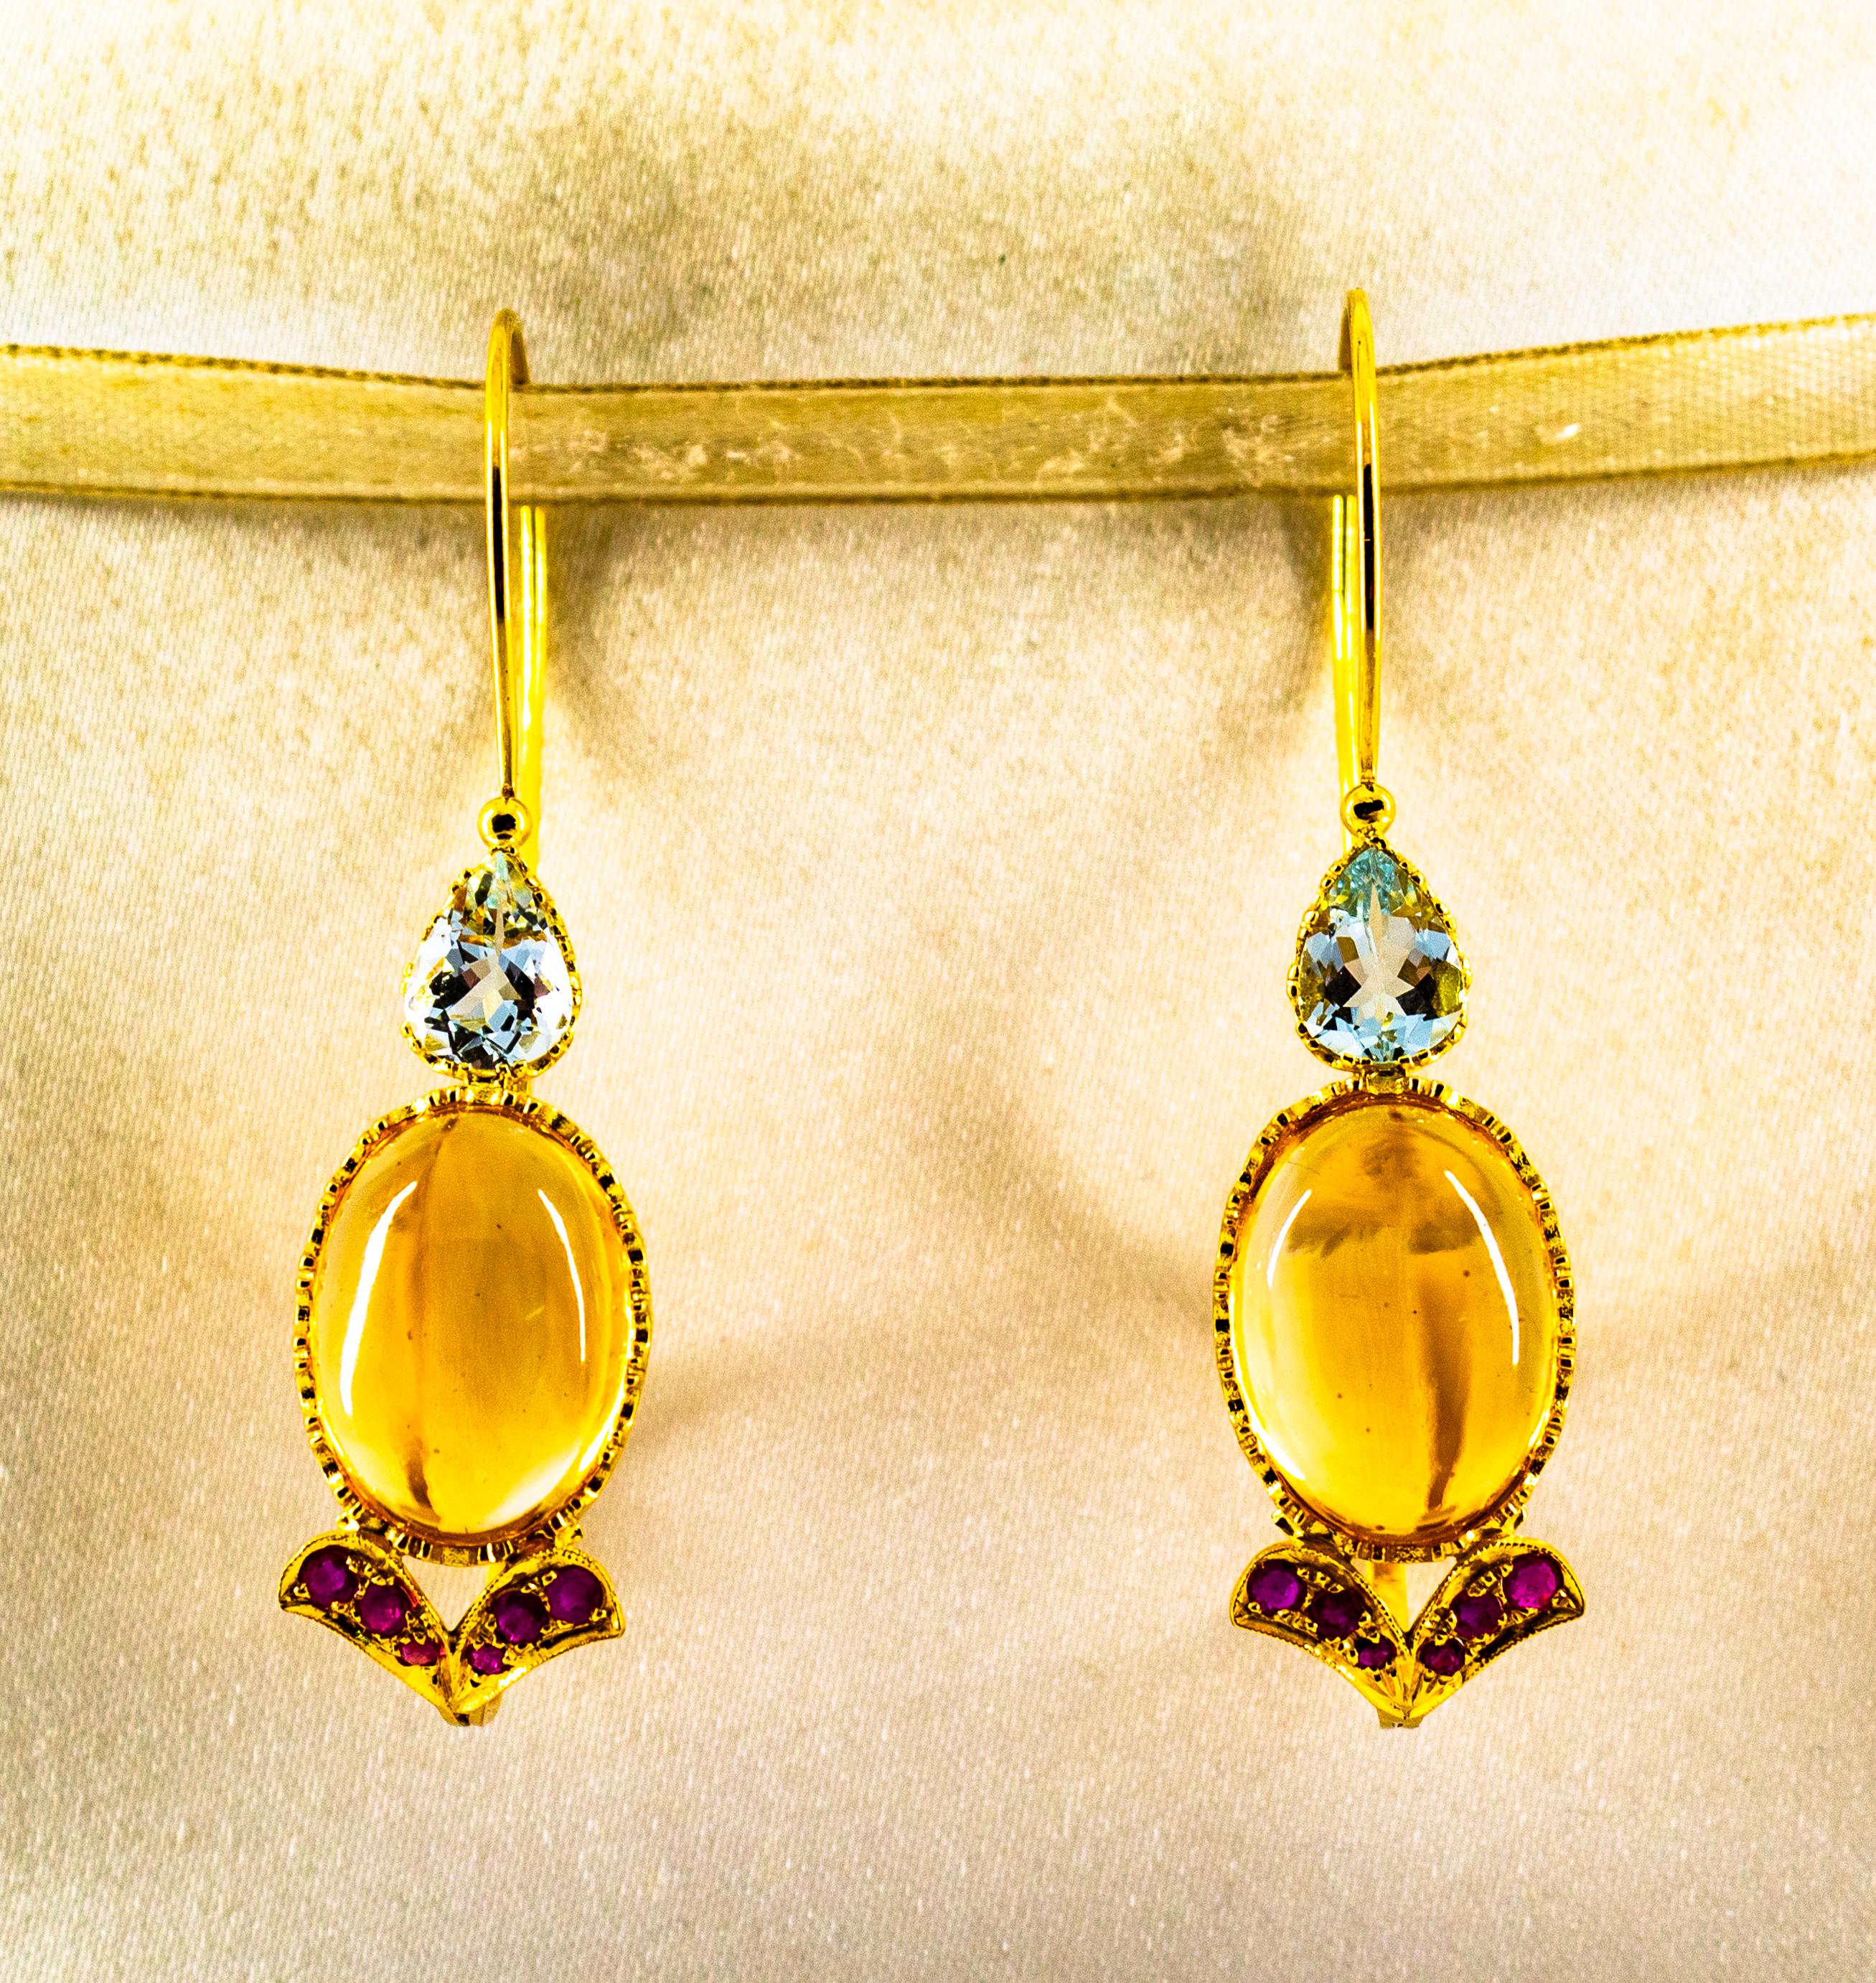 These Earrings are made of 9K Yellow Gold.
These Earrings have 0.32 Carats of Rubies.
These Earrings have 2.80 Carats of Aquamarines.
These Earrings have 12.25 Carats of Cabochon Cut Citrine.
These Earrings are inspired by Art Nouveau.
All our